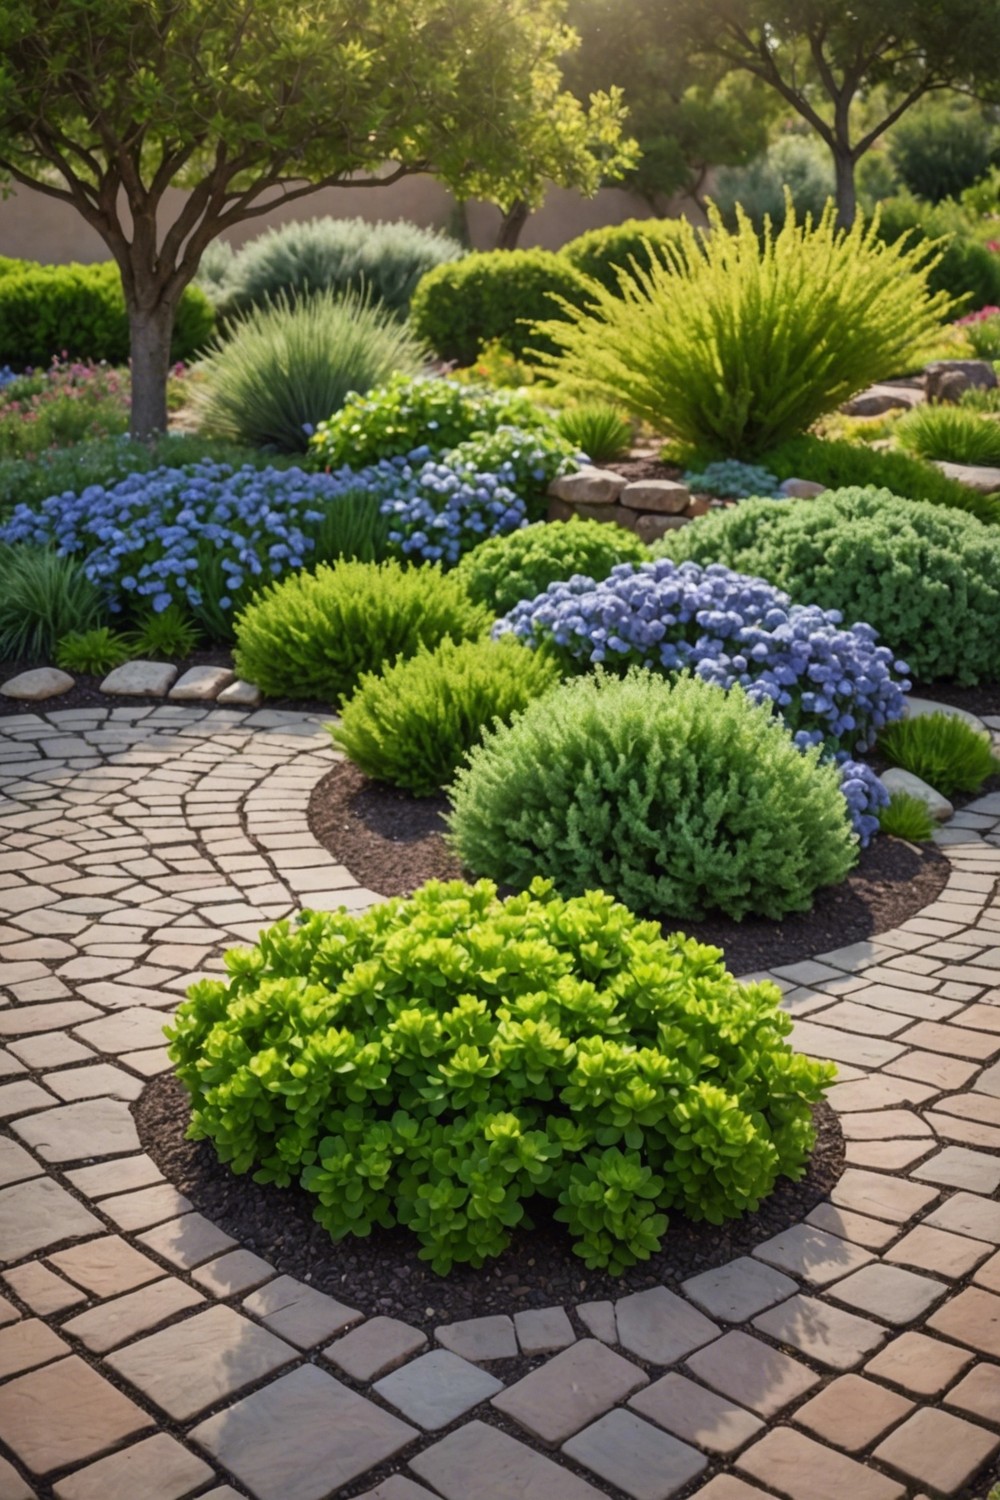 Soften the Look with Desert Ground Covers